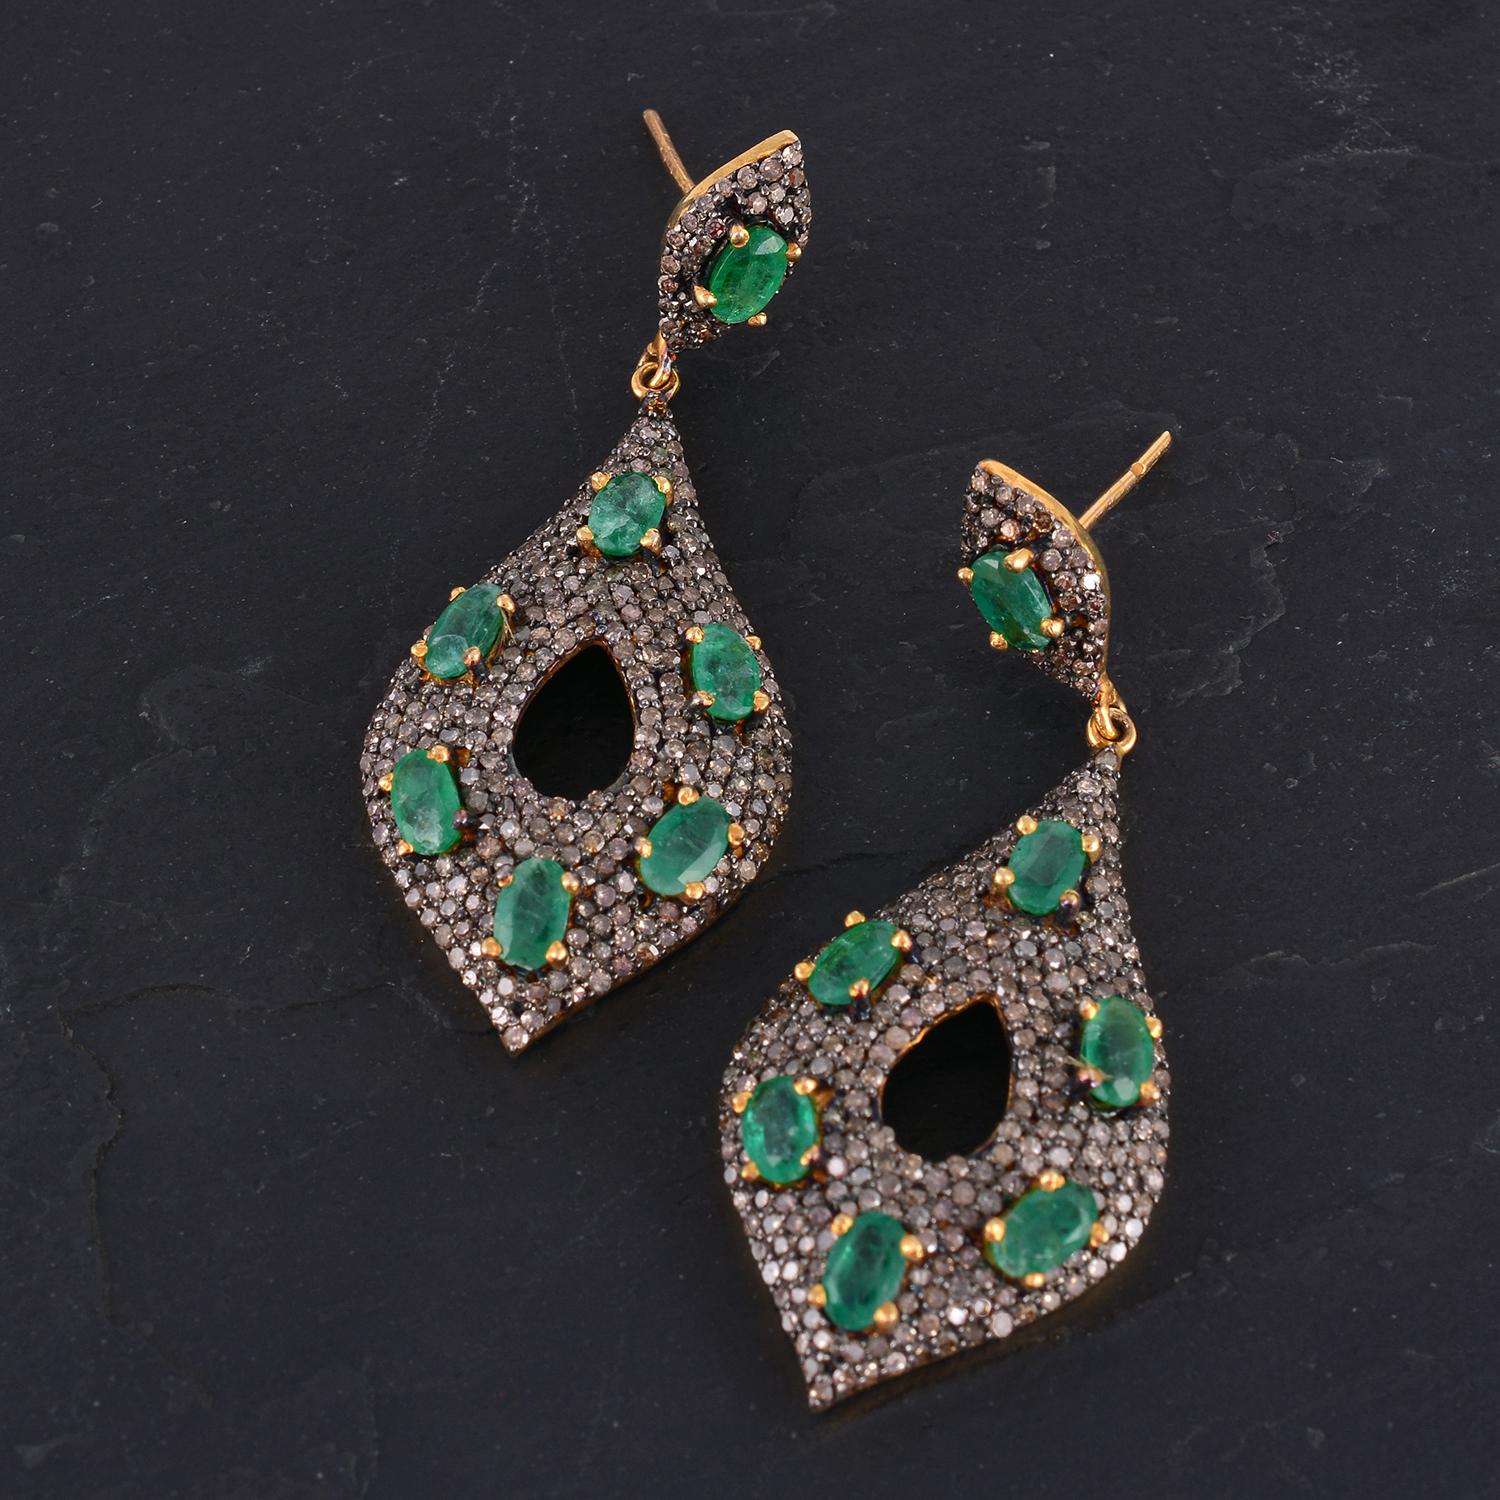 Total Gross weight of the earring worth 9.66 grams Gold with 0.48 grams and 925 sterling silver with 7.936 grams.
From an astrological point of view, Emerald is worn to strengthen Mercury. Emerald is green in colour and the ones that are light green